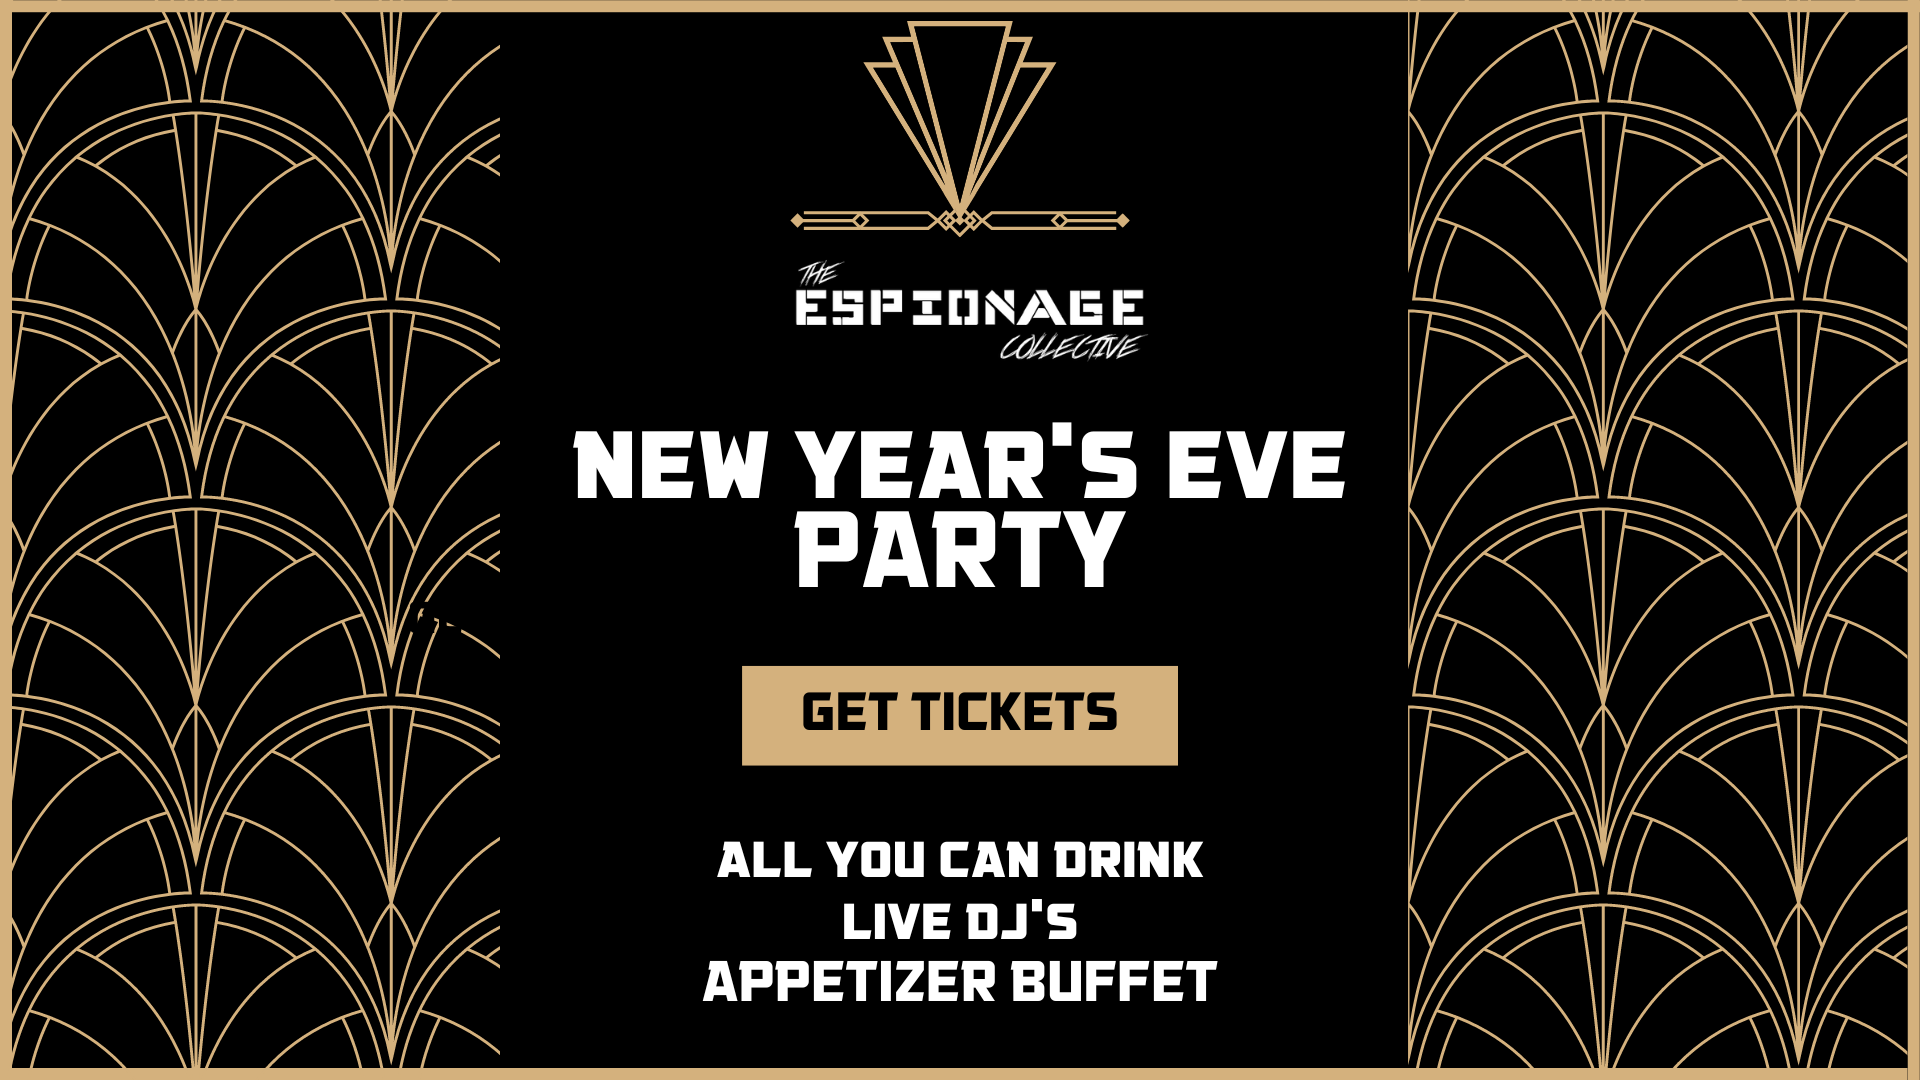 New Year's Eve Party!